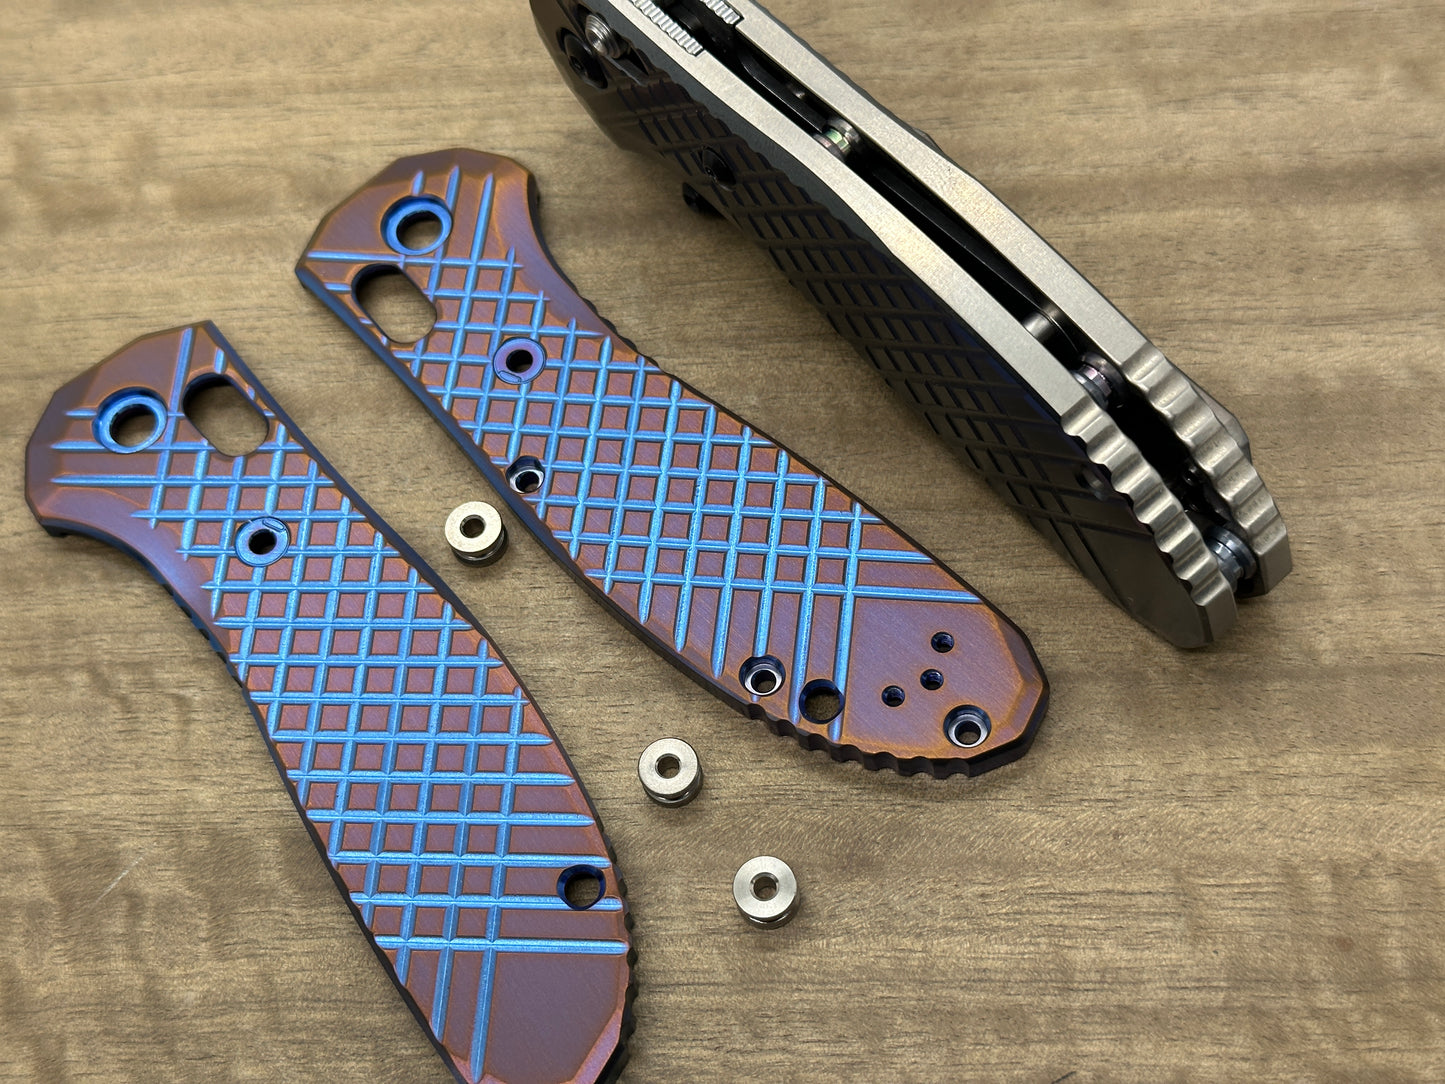 2 Tone (Blue-Purple) FRAG Cnc milled Scales for Benchmade GRIPTILIAN 551 & 550